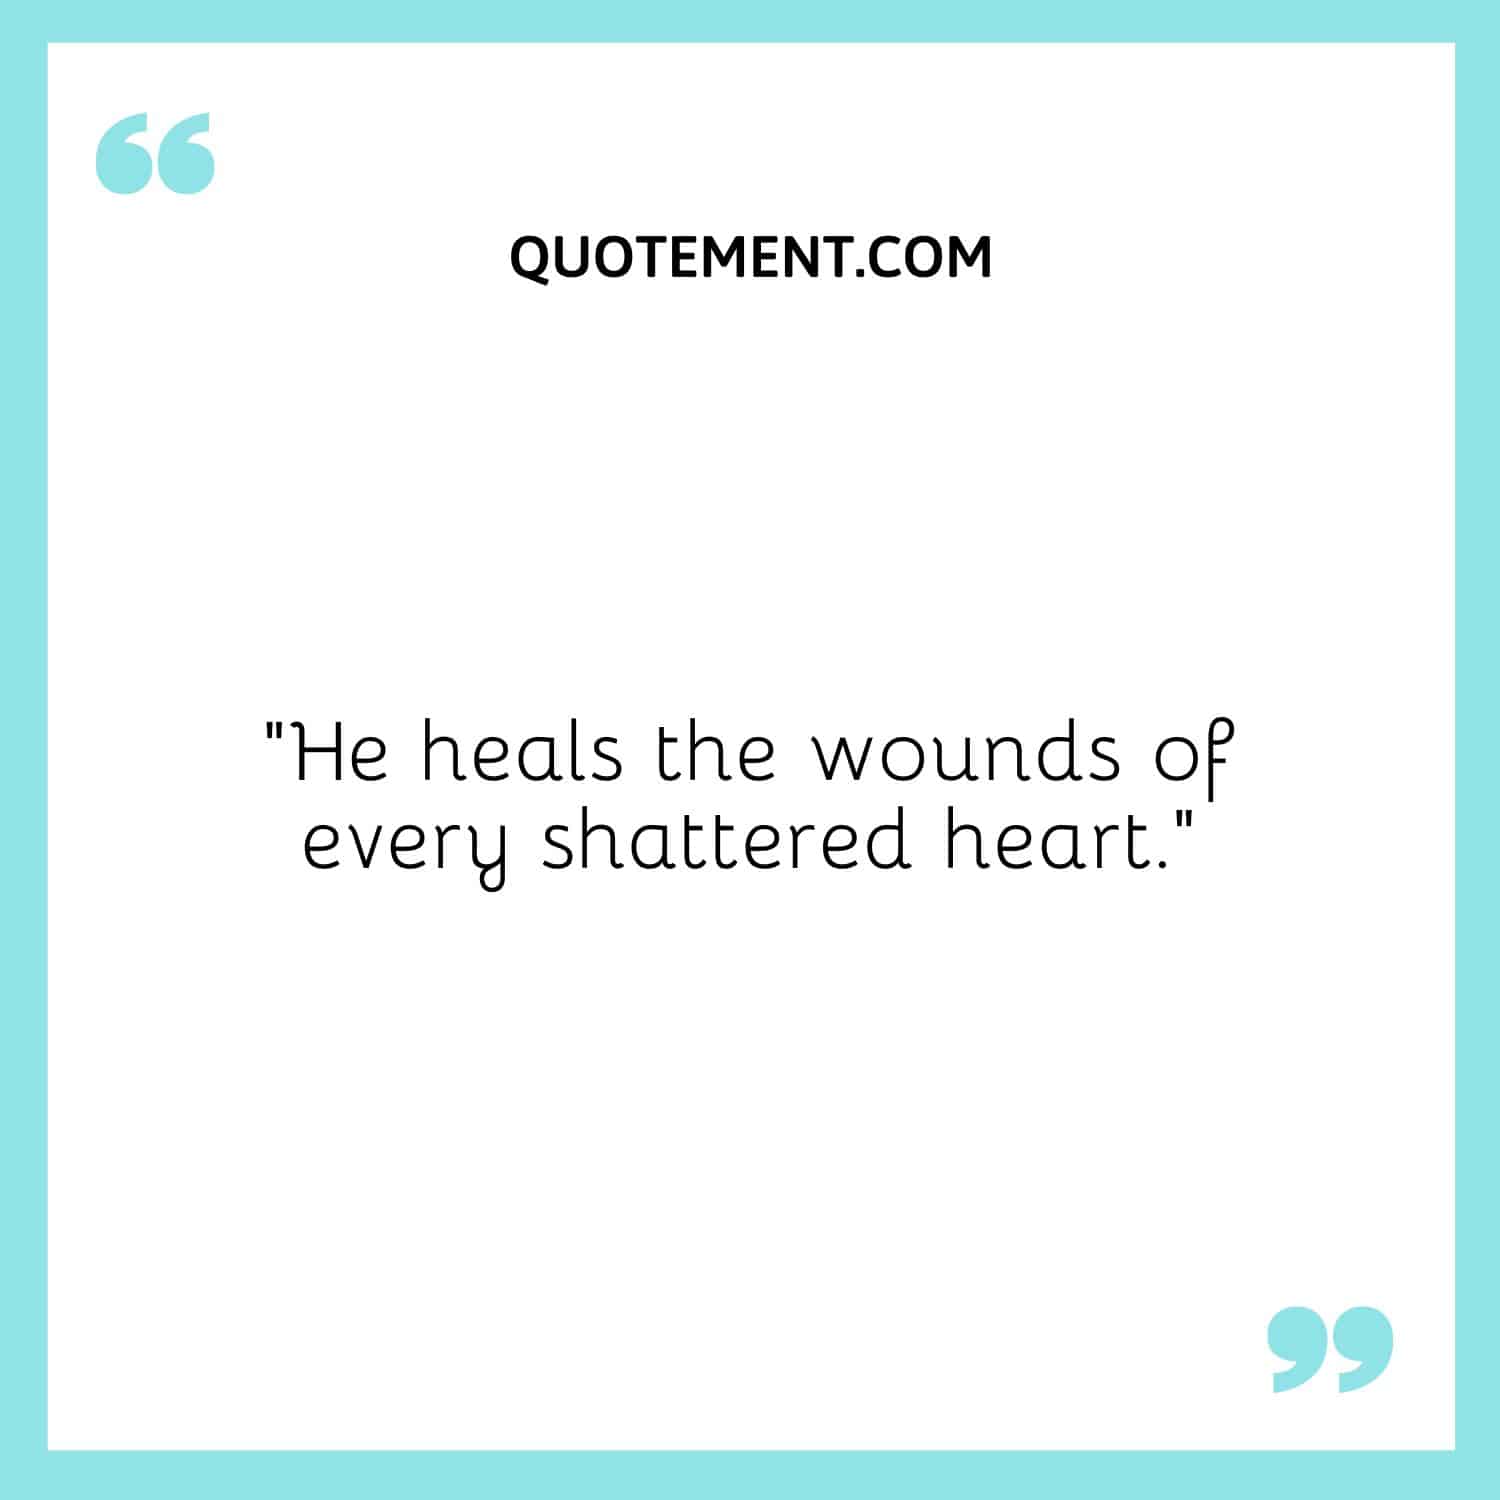 He heals the wounds of every shattered heart